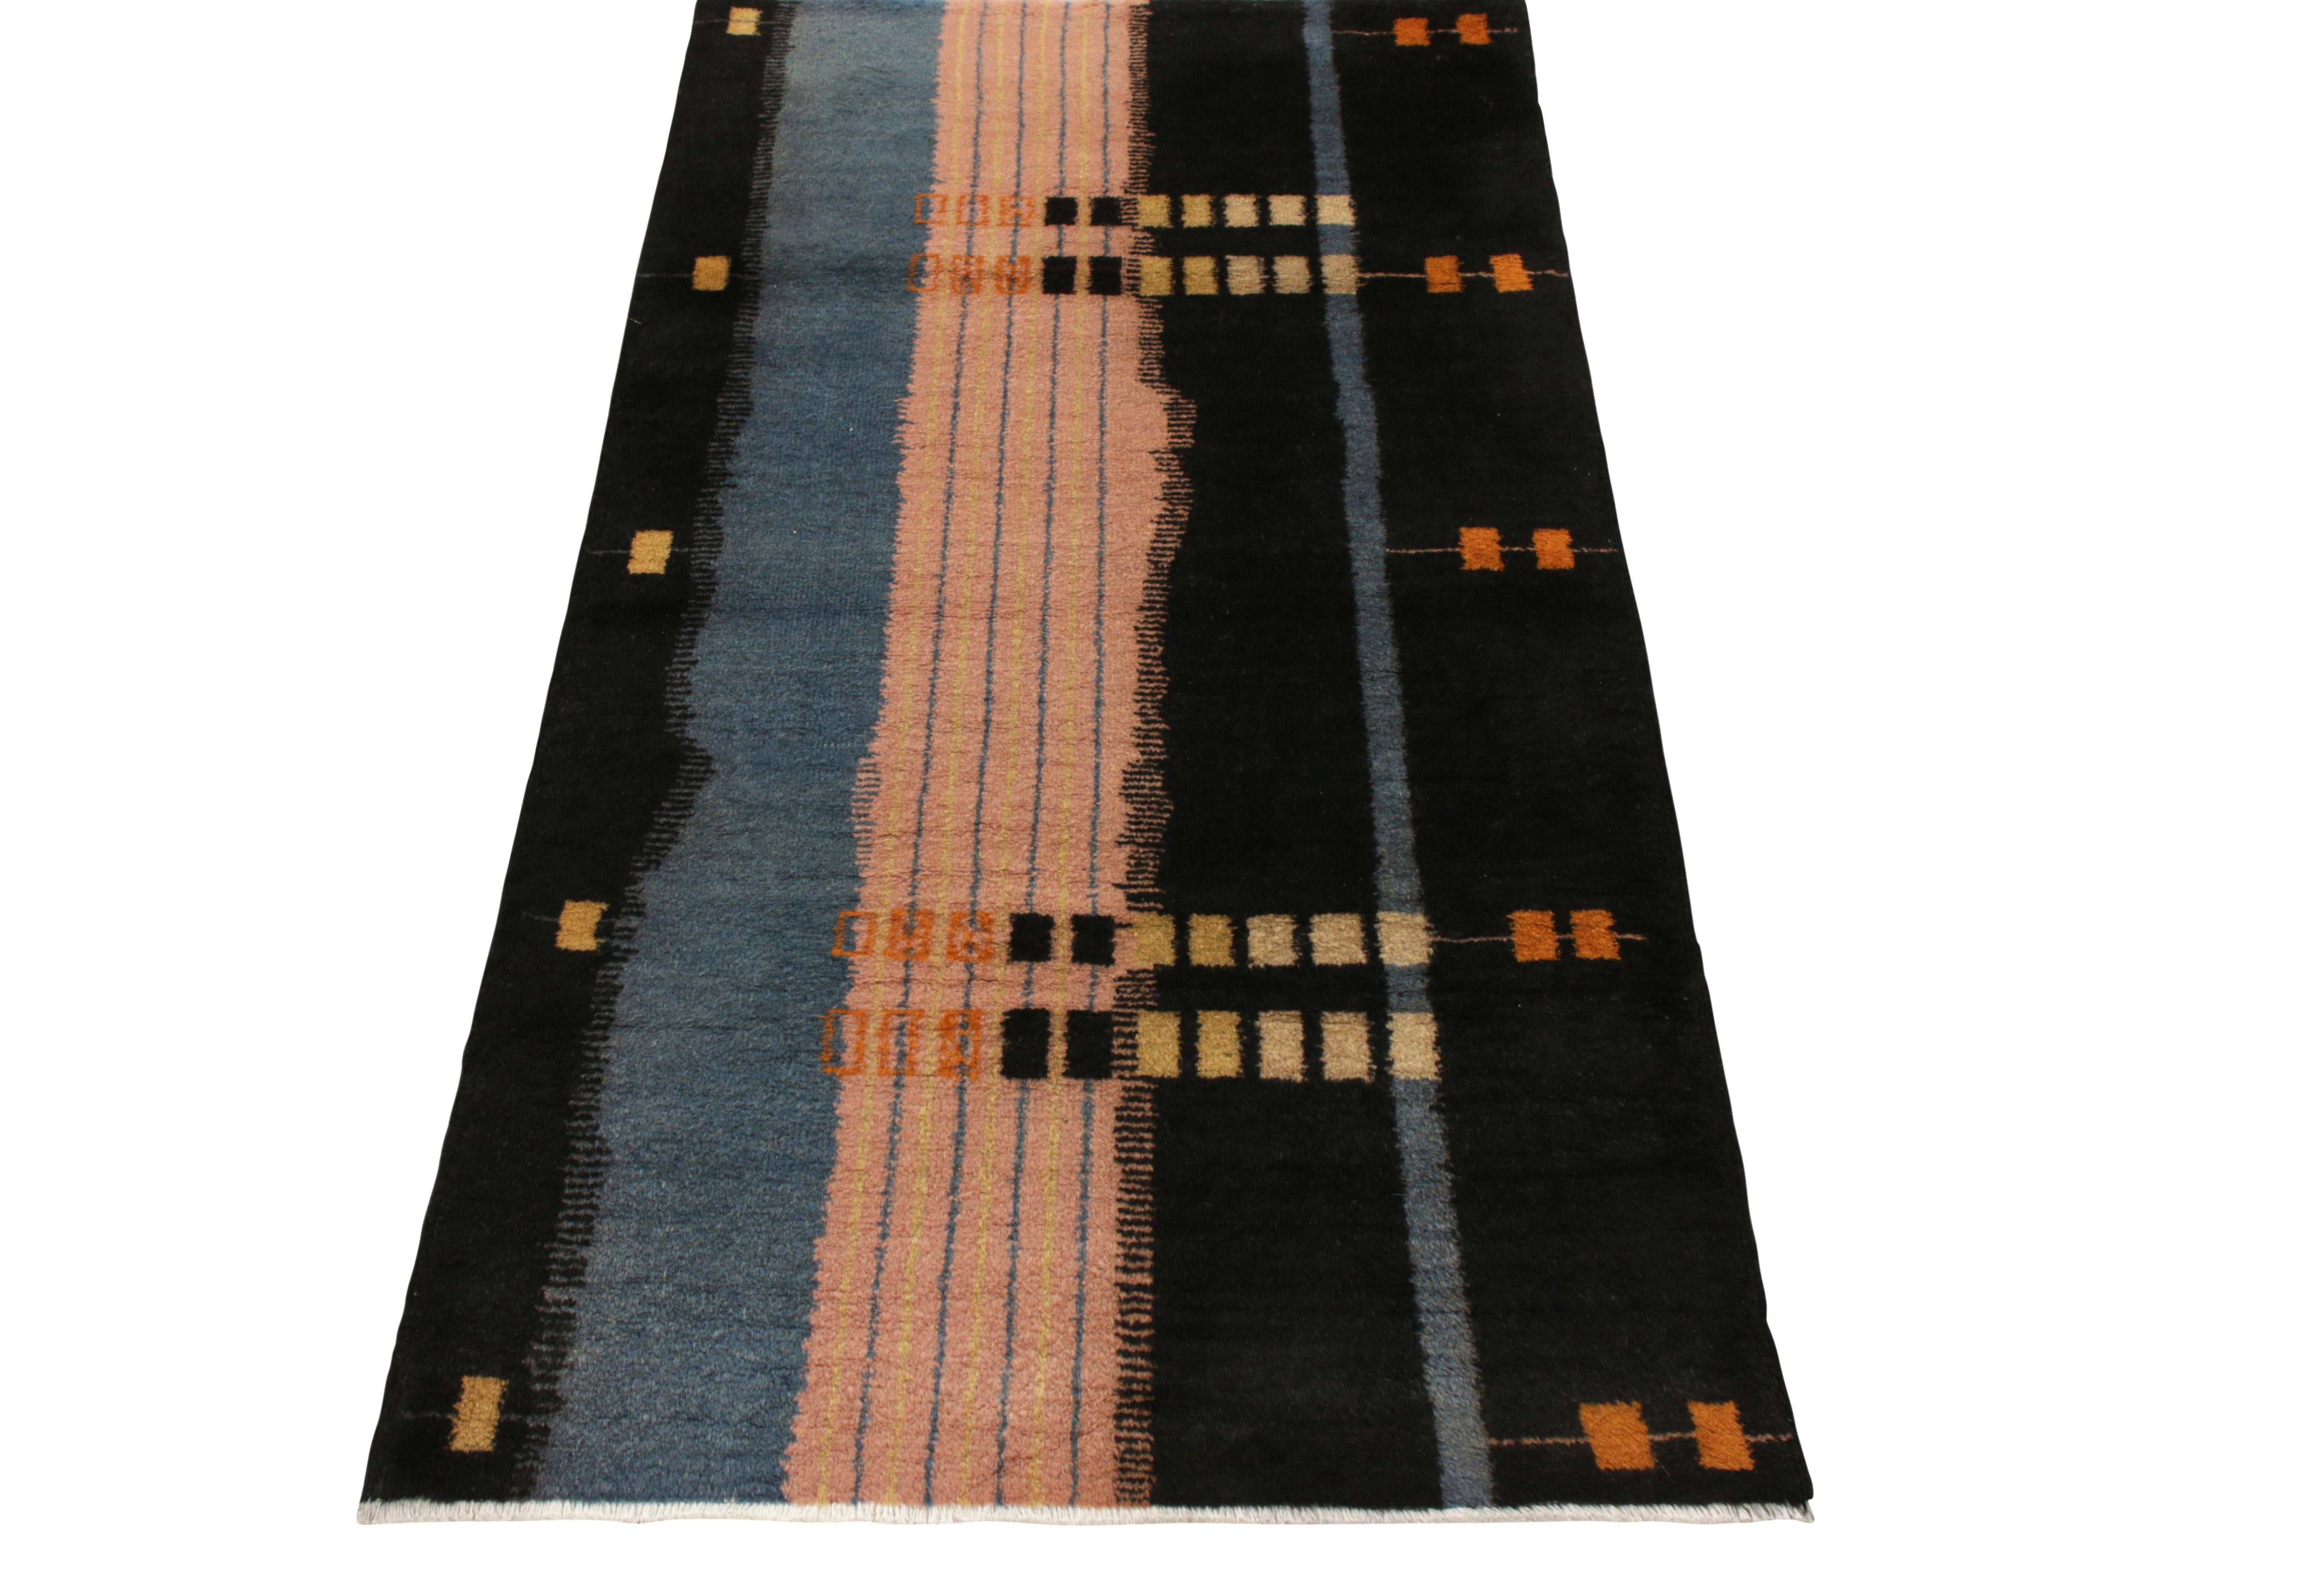 Celebrating a rare mid-century style of the 1960s, Rug & Kilim presents this 3x5 Turkish vintage Art Deco rug crafted by Zeki Müren from its commemorative Mid-Century Pasha Collection. Hand-knotted in wool, this piece features solid black and blue